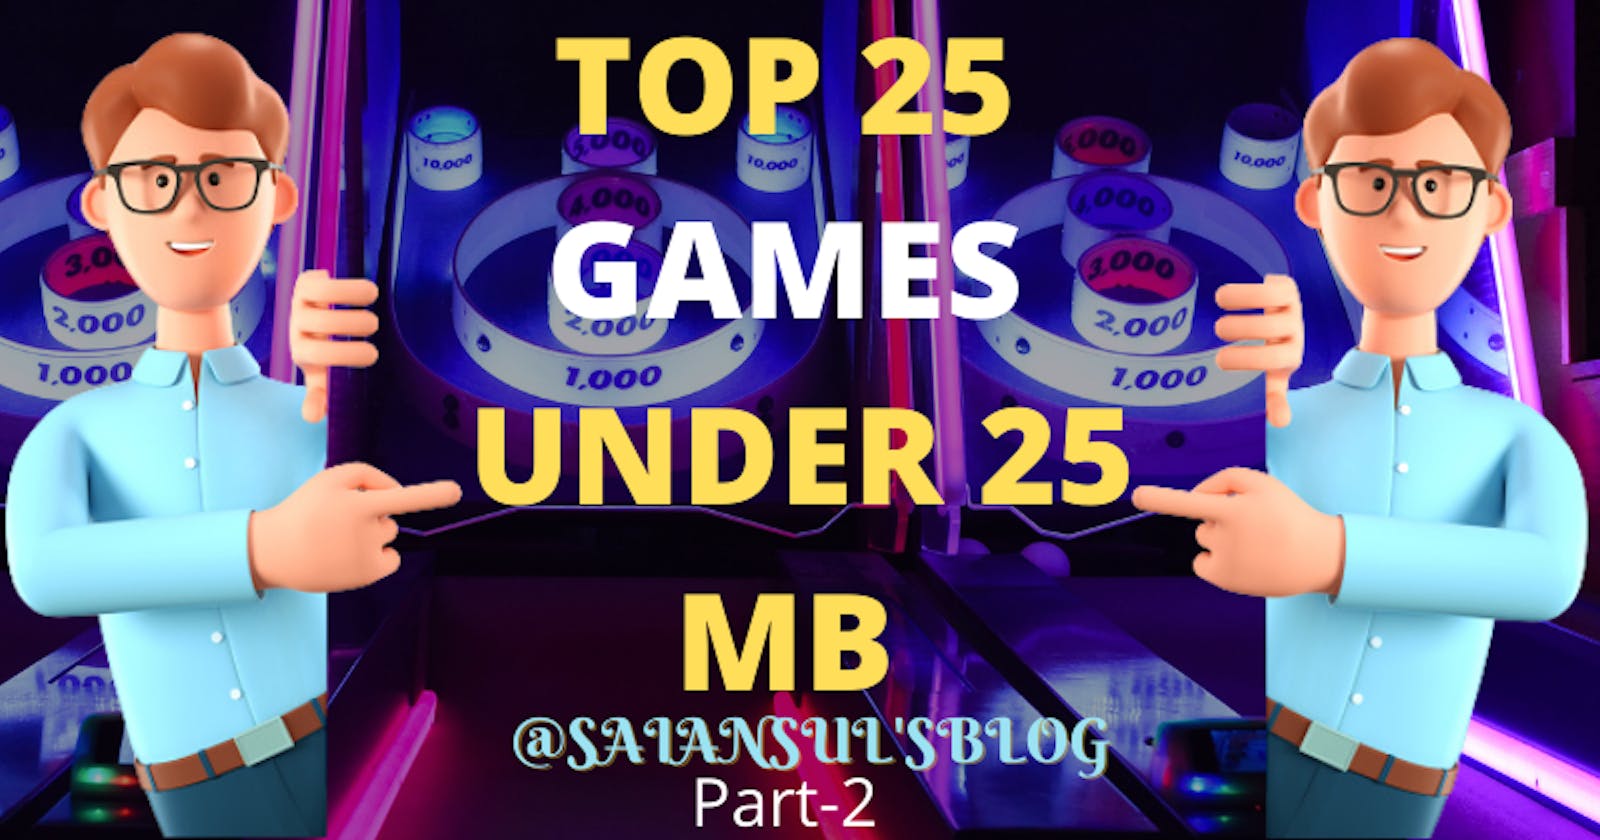 Top 25 Android Games under 25 Mb (Part 2)